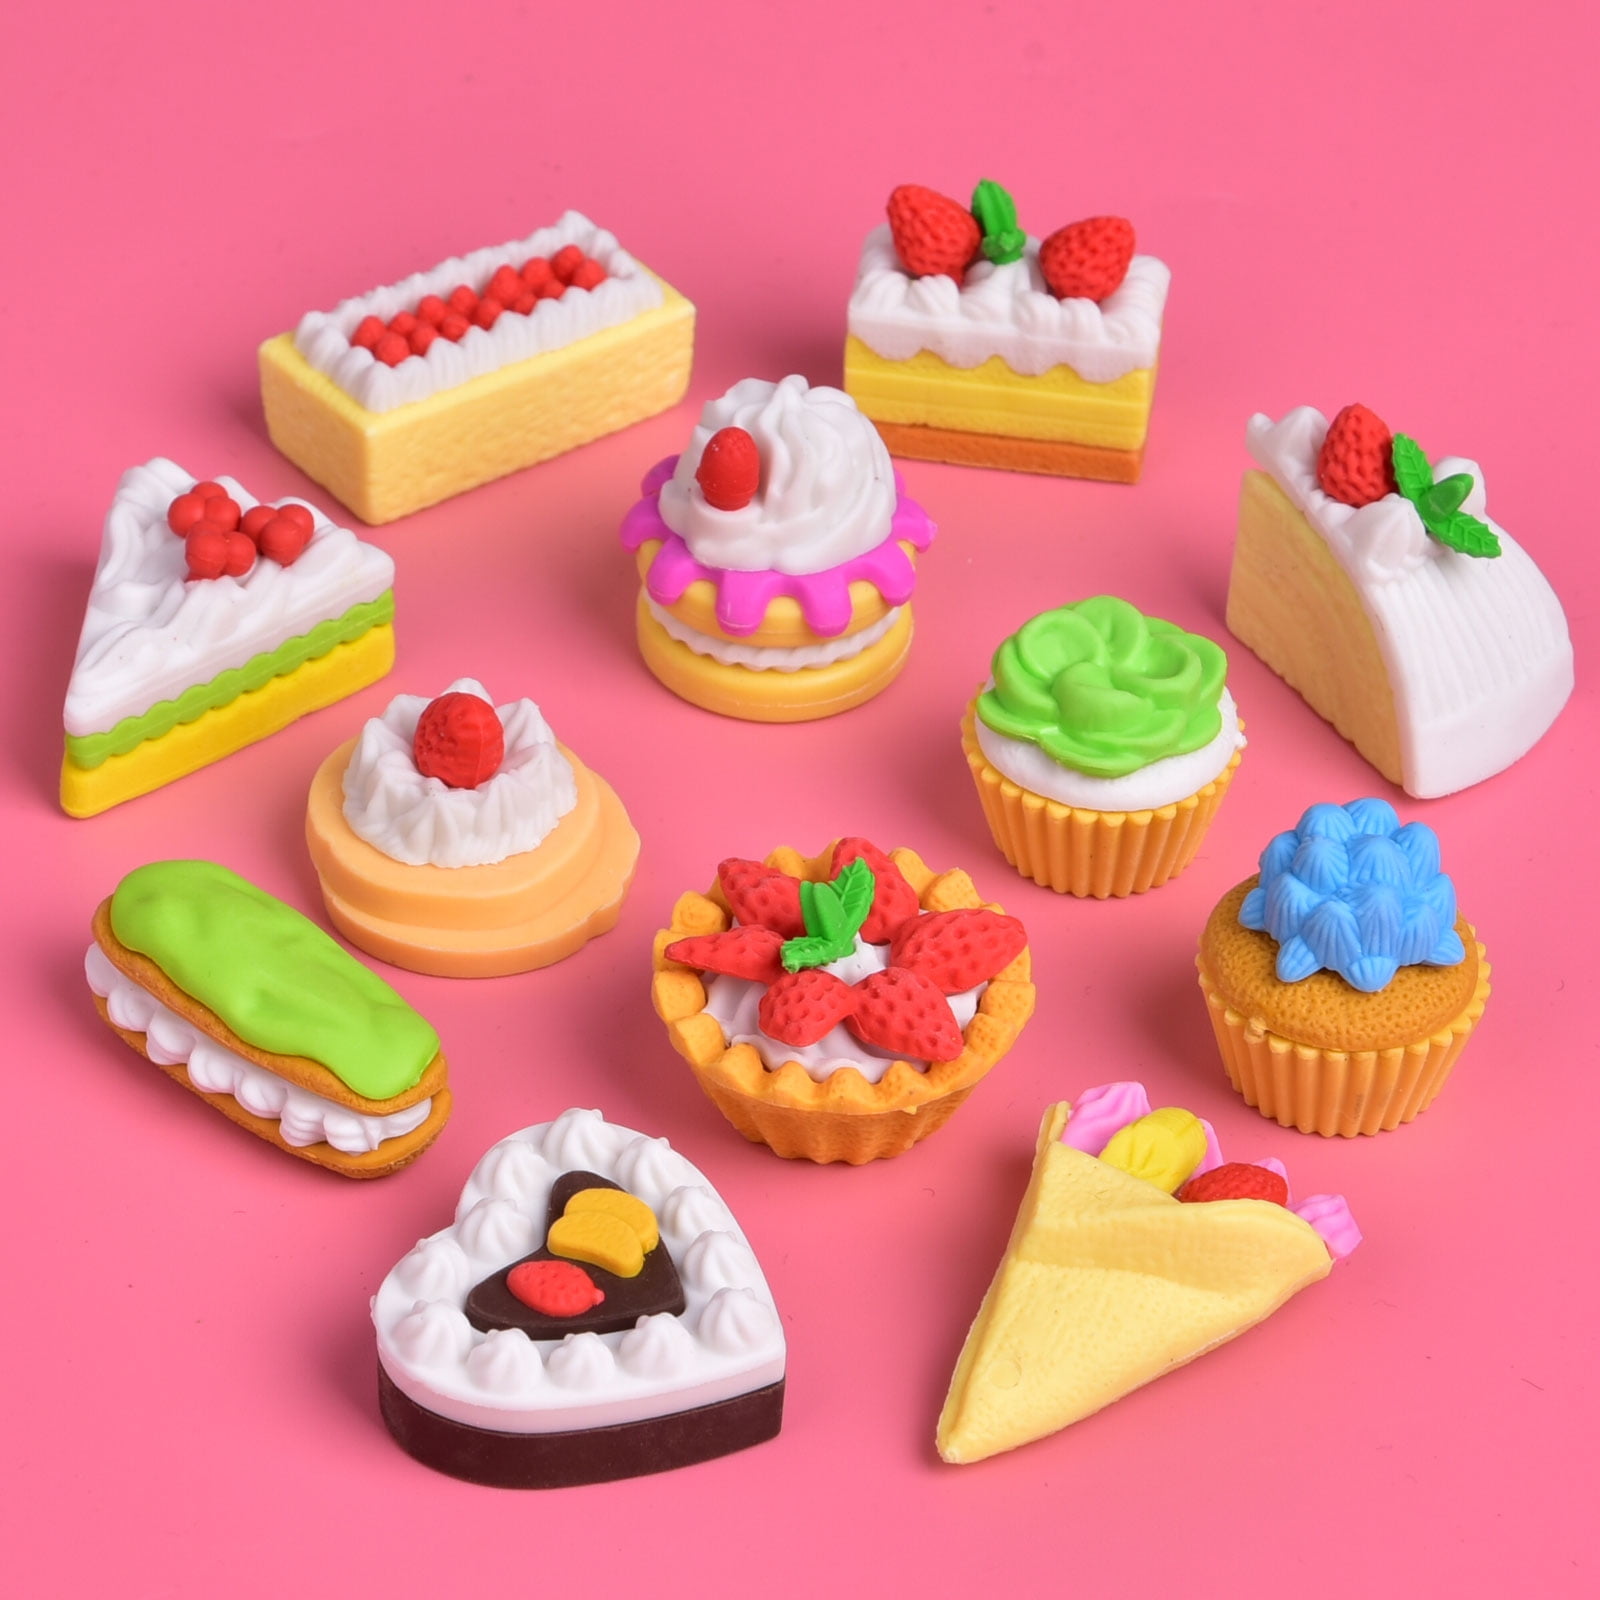 Fun Little Toys Confetti City 60 Pcs Assorted Themed Erasers,Mini Novelty  Food Erasers,Classroom Prizes,Party Favors,School Supplies,Birthday,Xmas